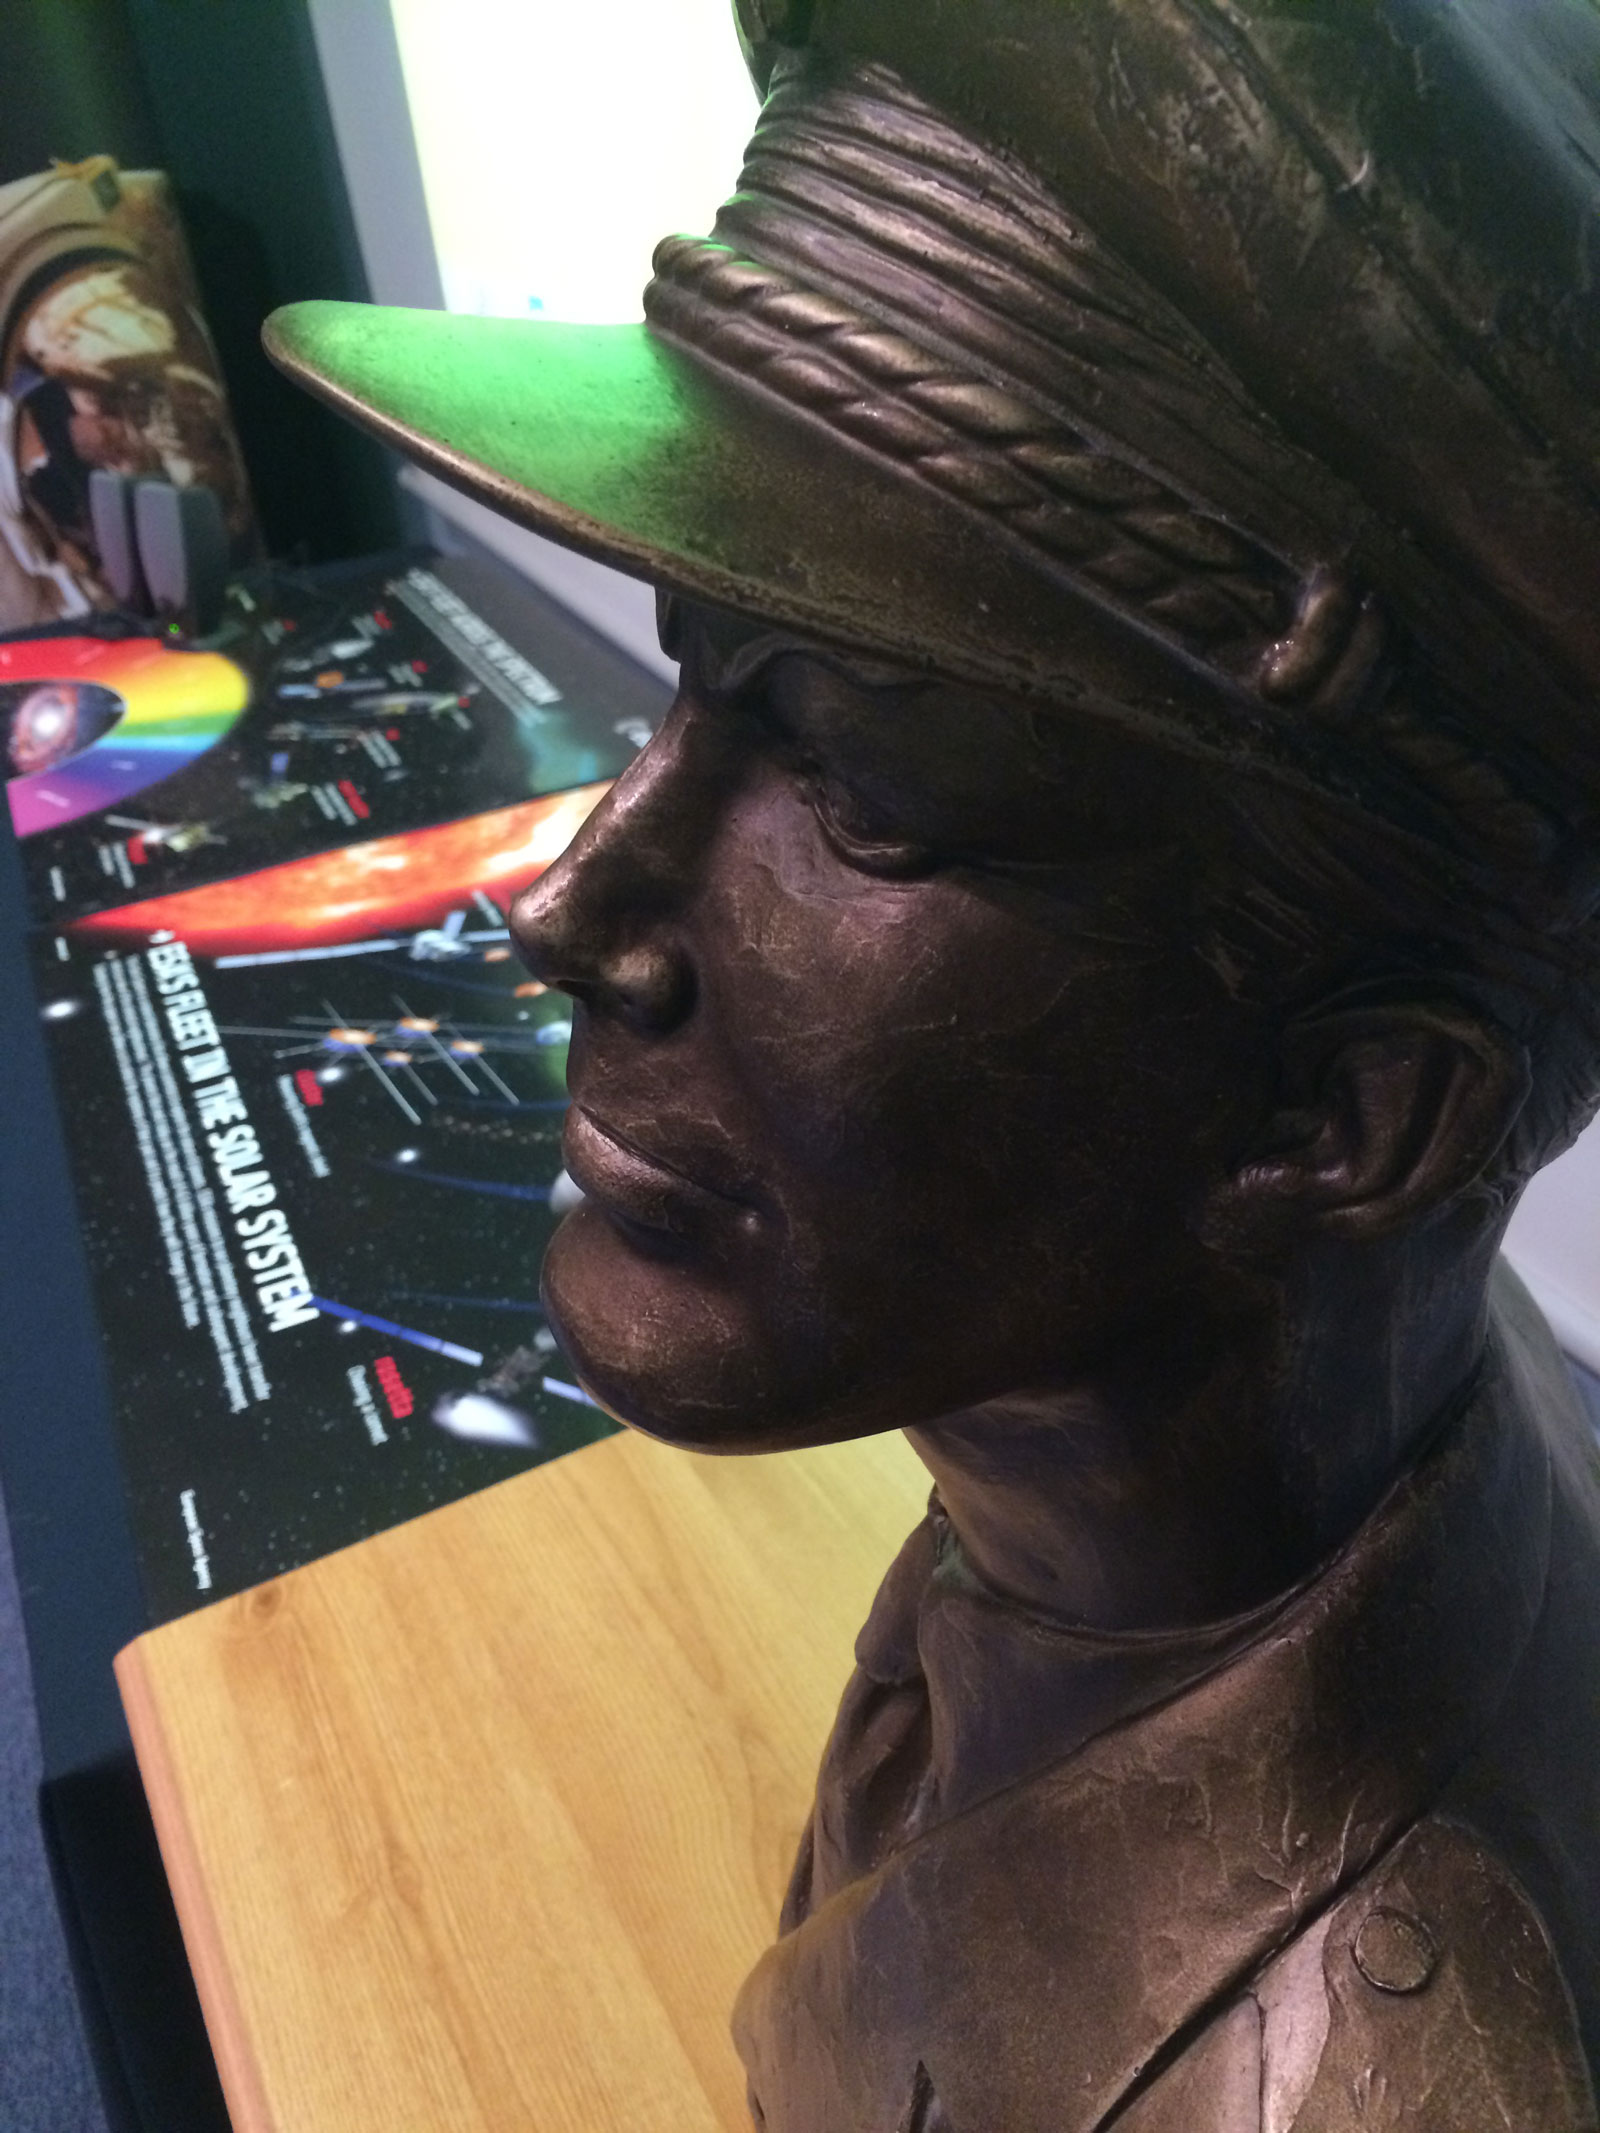 A magnificent Dan Dare bronze on display during "Yesterday's Tomorrow" event at the British Interplanetary Society in April 2015.